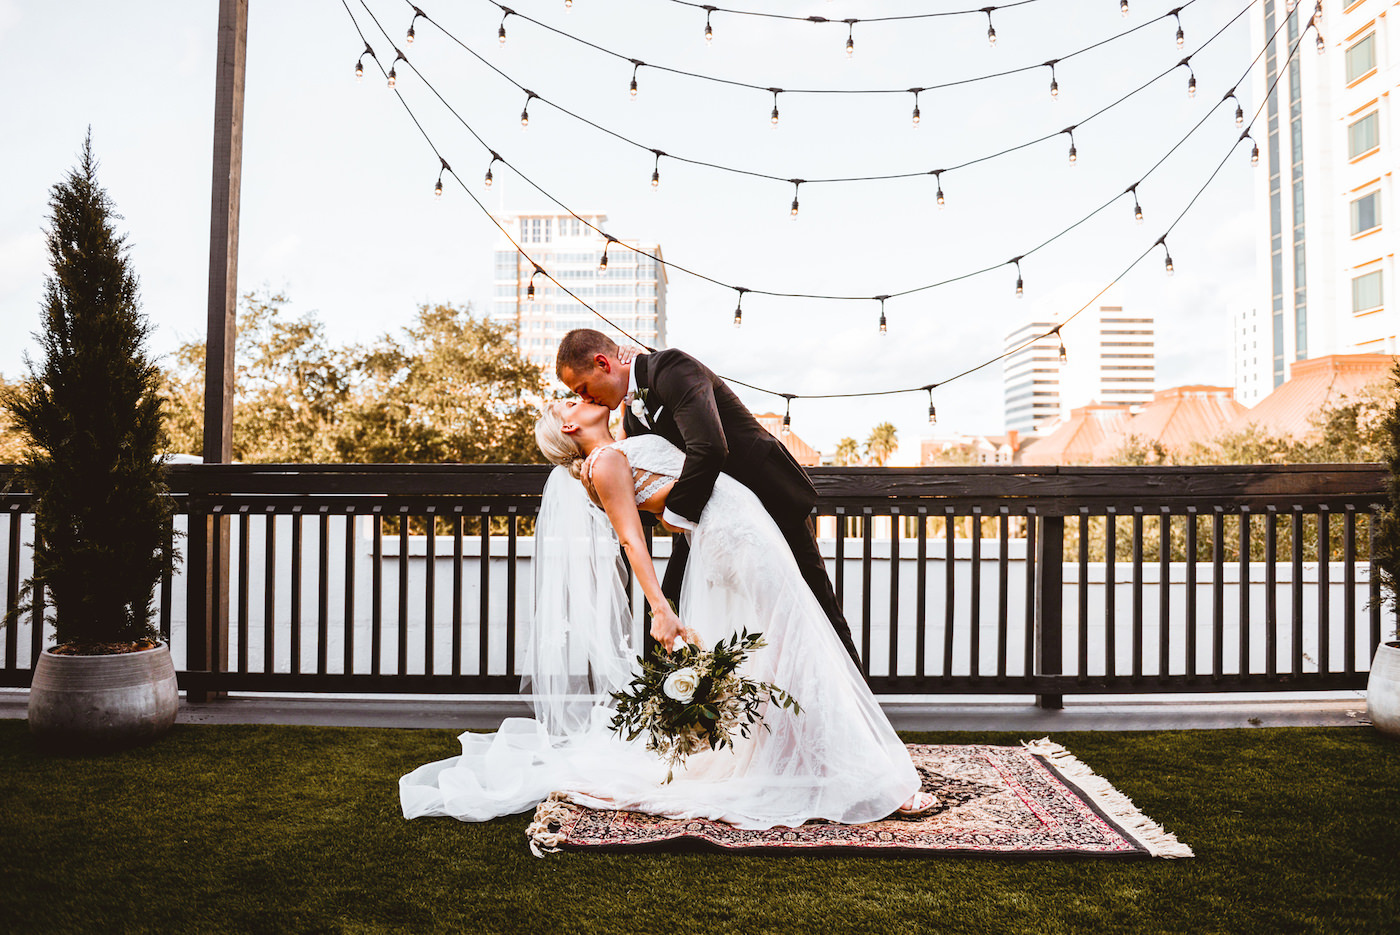 Bride and Groom Dip and Kiss Portrait | Black and White Outdoor Rooftop Wedding Ceremony with Edison Bulb Backdrop | Downtown St. Pete Wedding Venue Station House